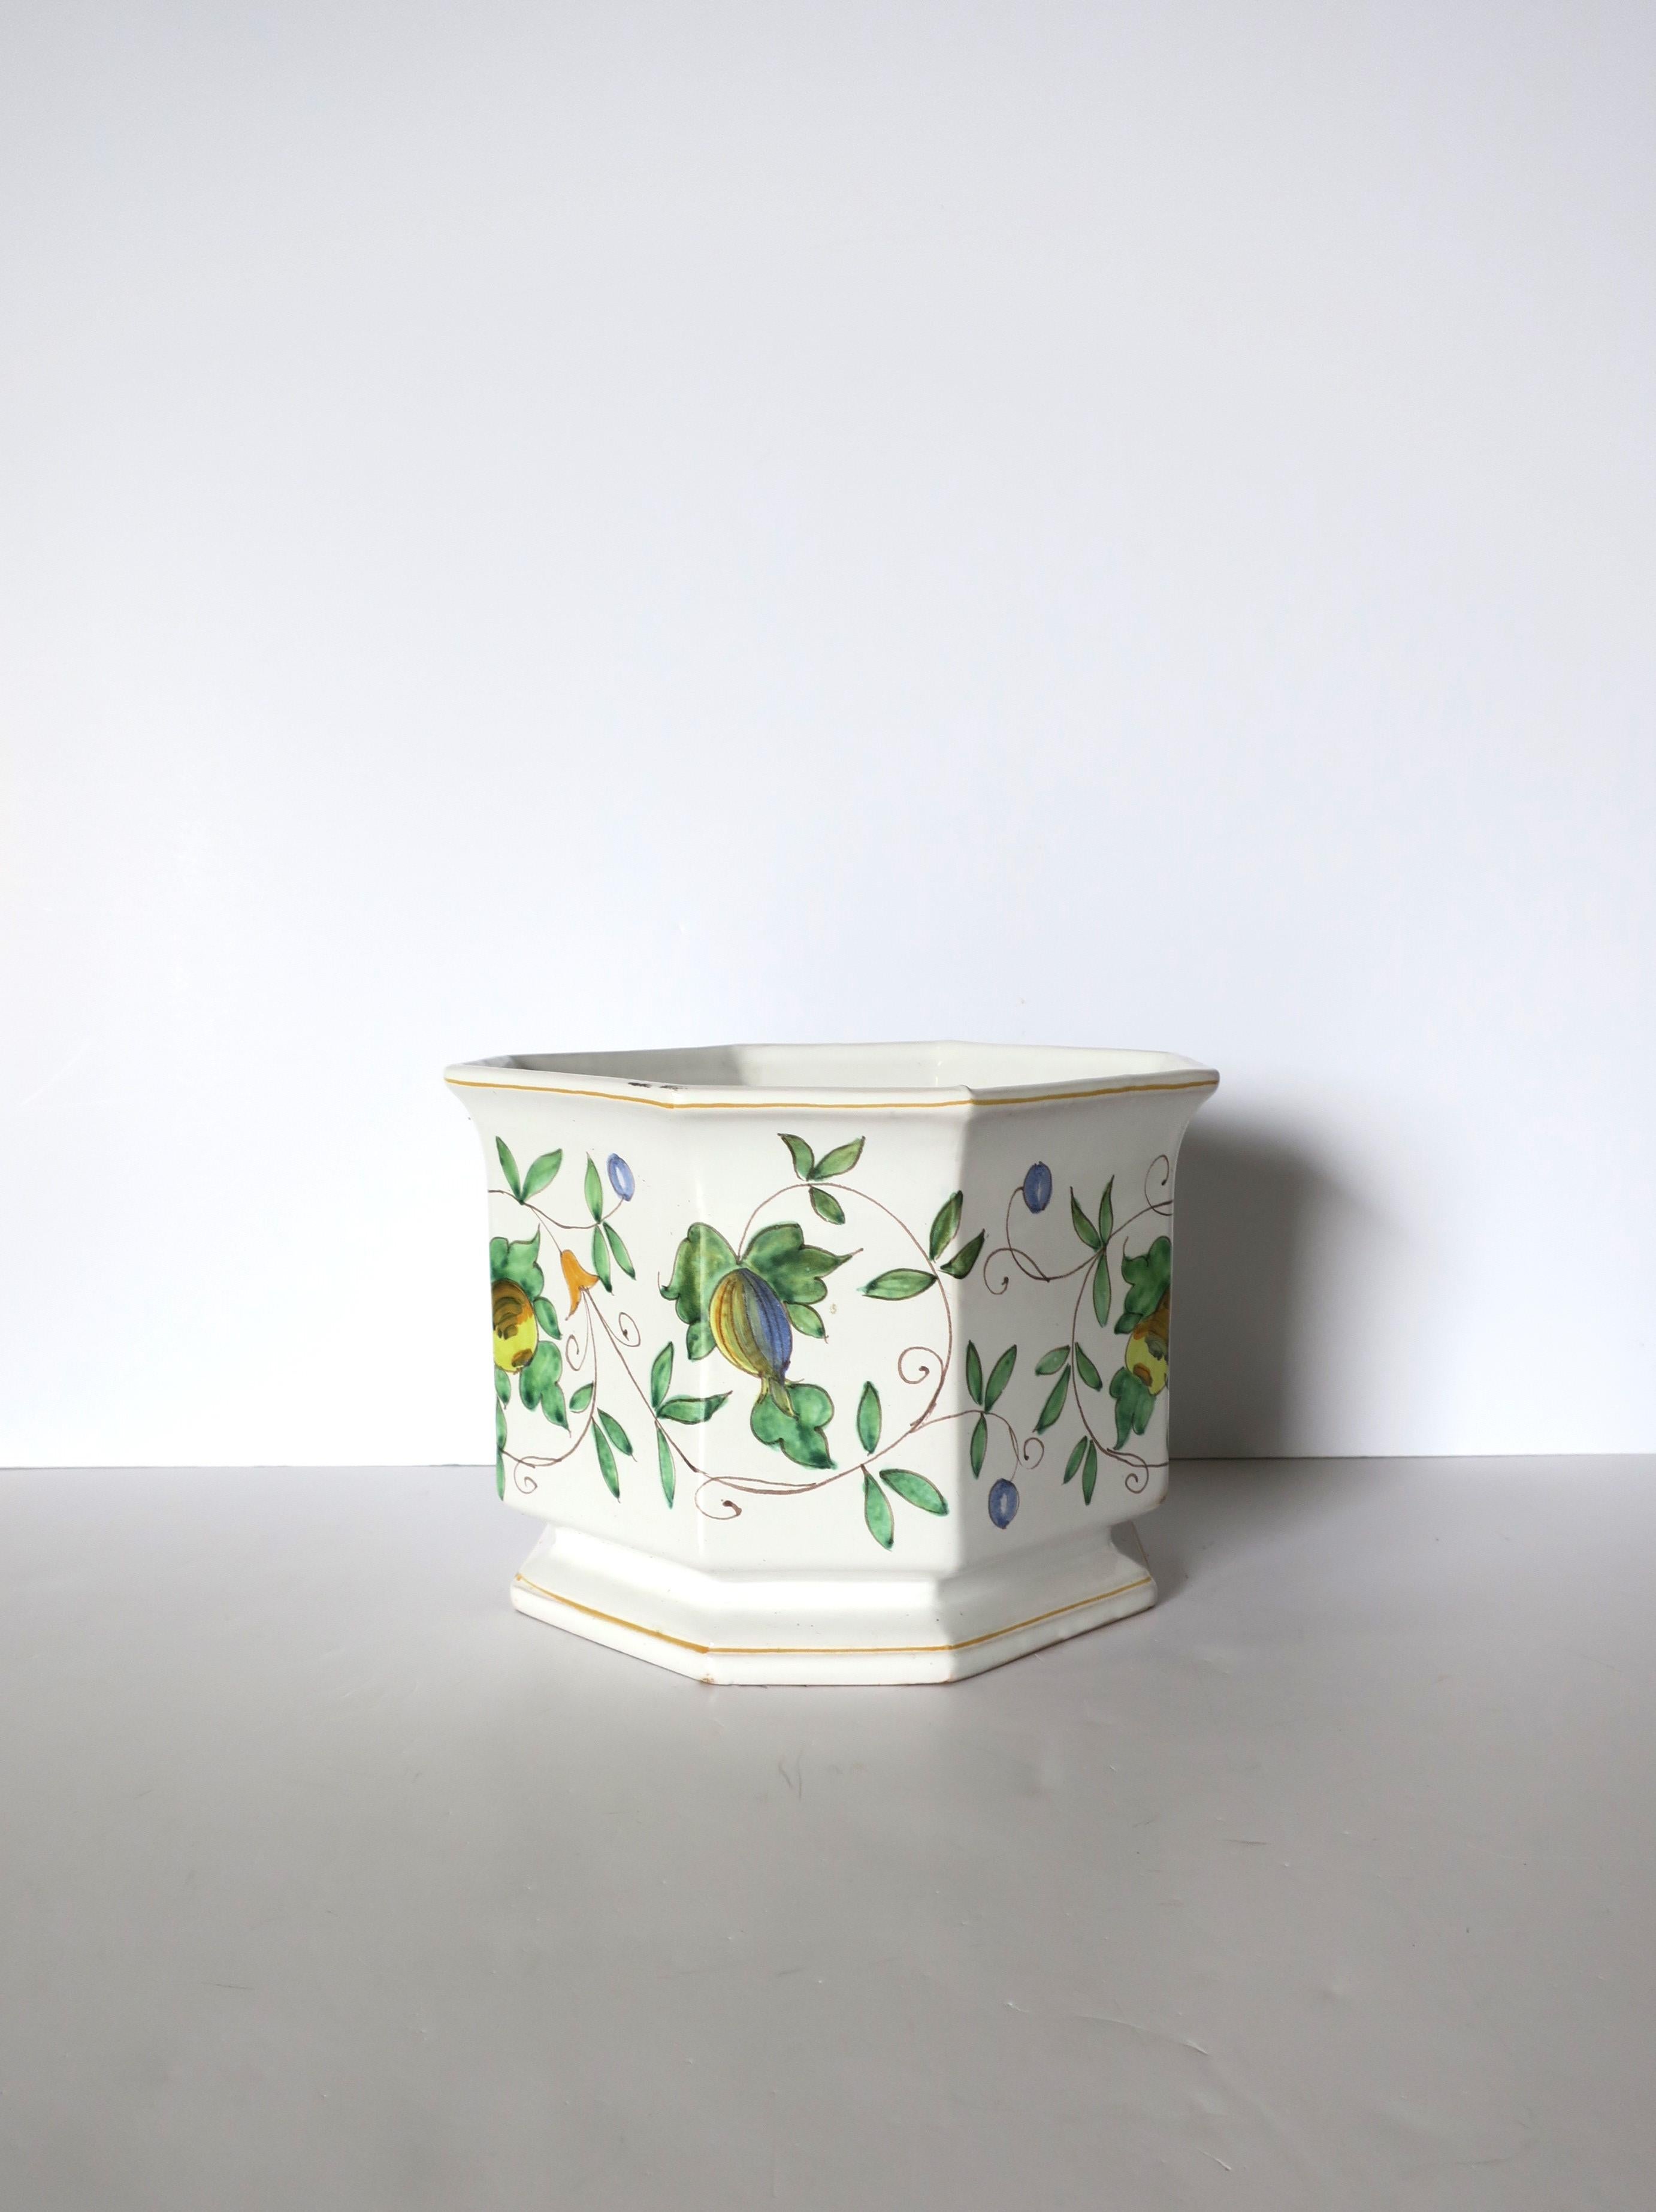 Italian Ceramic Flower or Plant Holder Planter Cachepot with Fruit & Vine Design In Good Condition For Sale In New York, NY